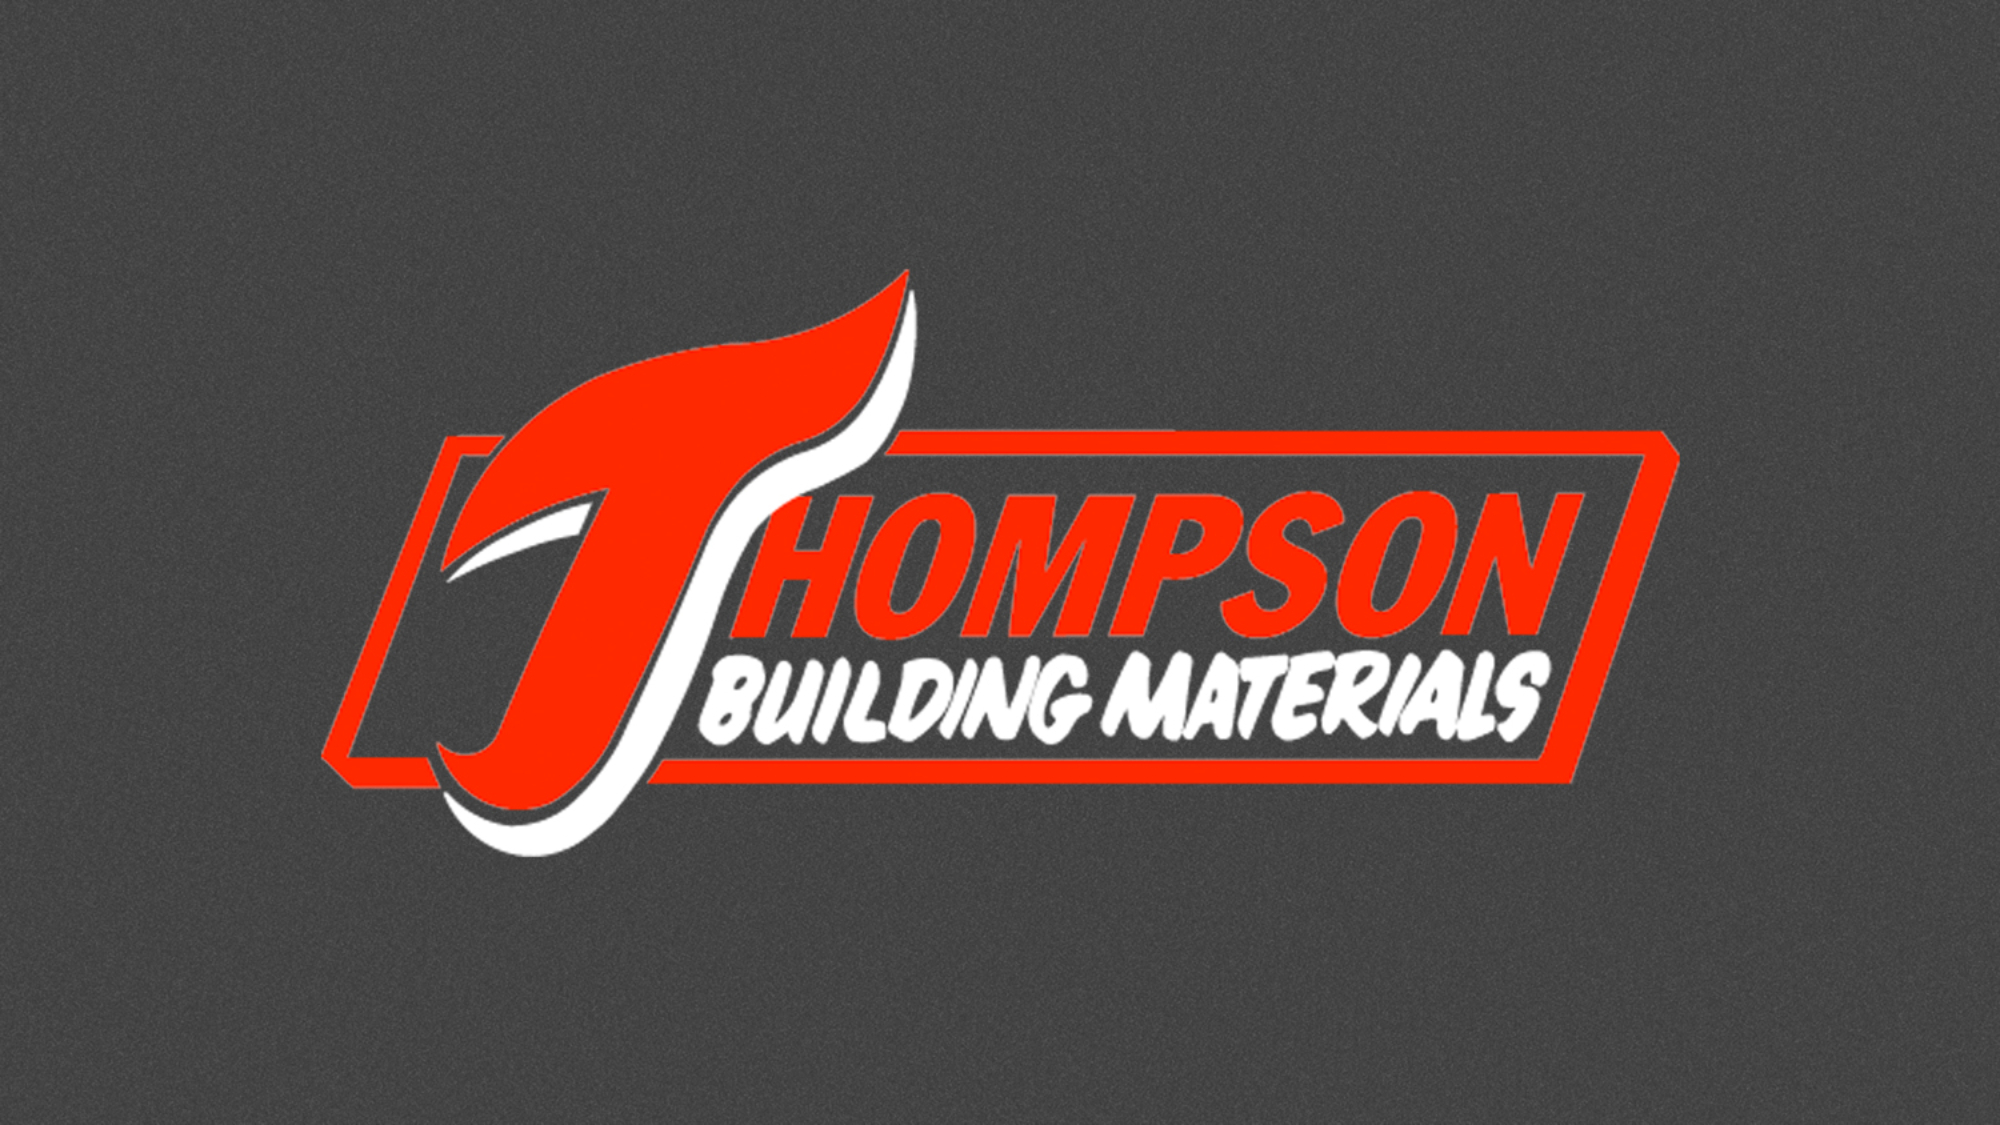 Read our comprehensive review of Thompson's Building Materials, a trusted provider of quality brick, thin brick, natural stone, and pavers. Discover their commitment to sustainable products and their passion for serving builders, architects, contractors, homeowners, and communities. Partner with Gott Marketing for all your marketing needs in the construction industry.